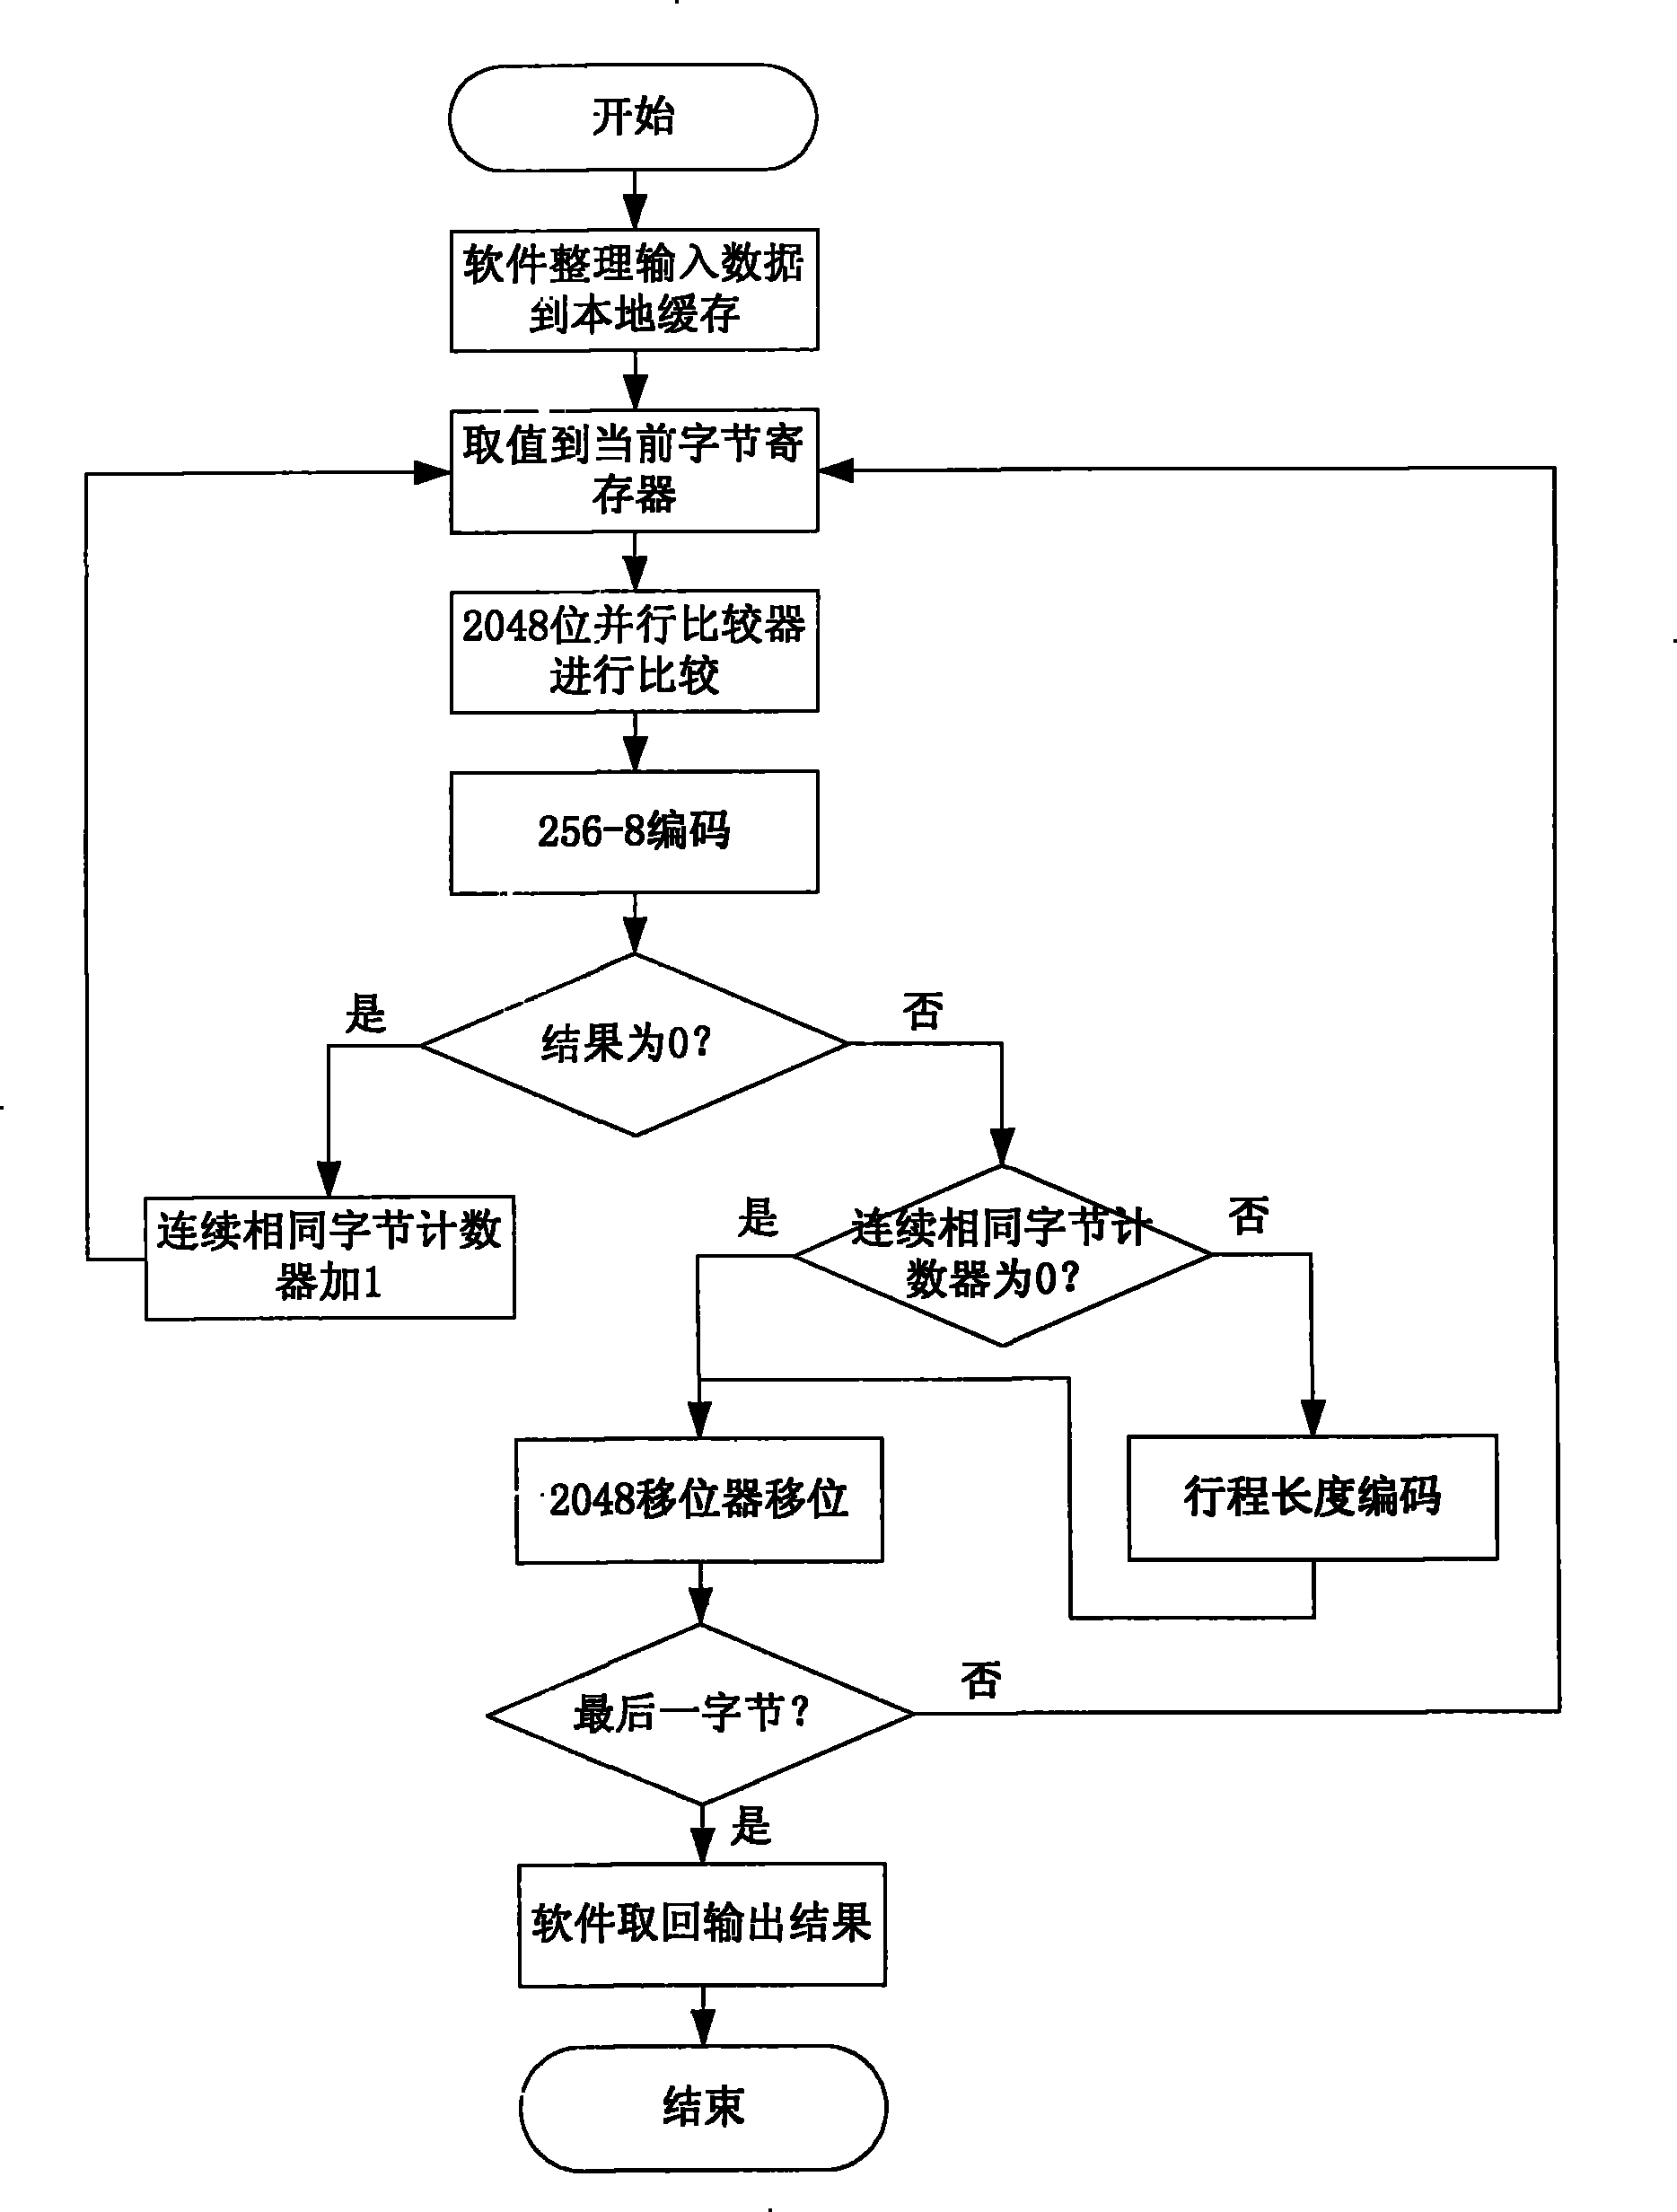 Hardware accelerated implementation process for bzip2 compression algorithm